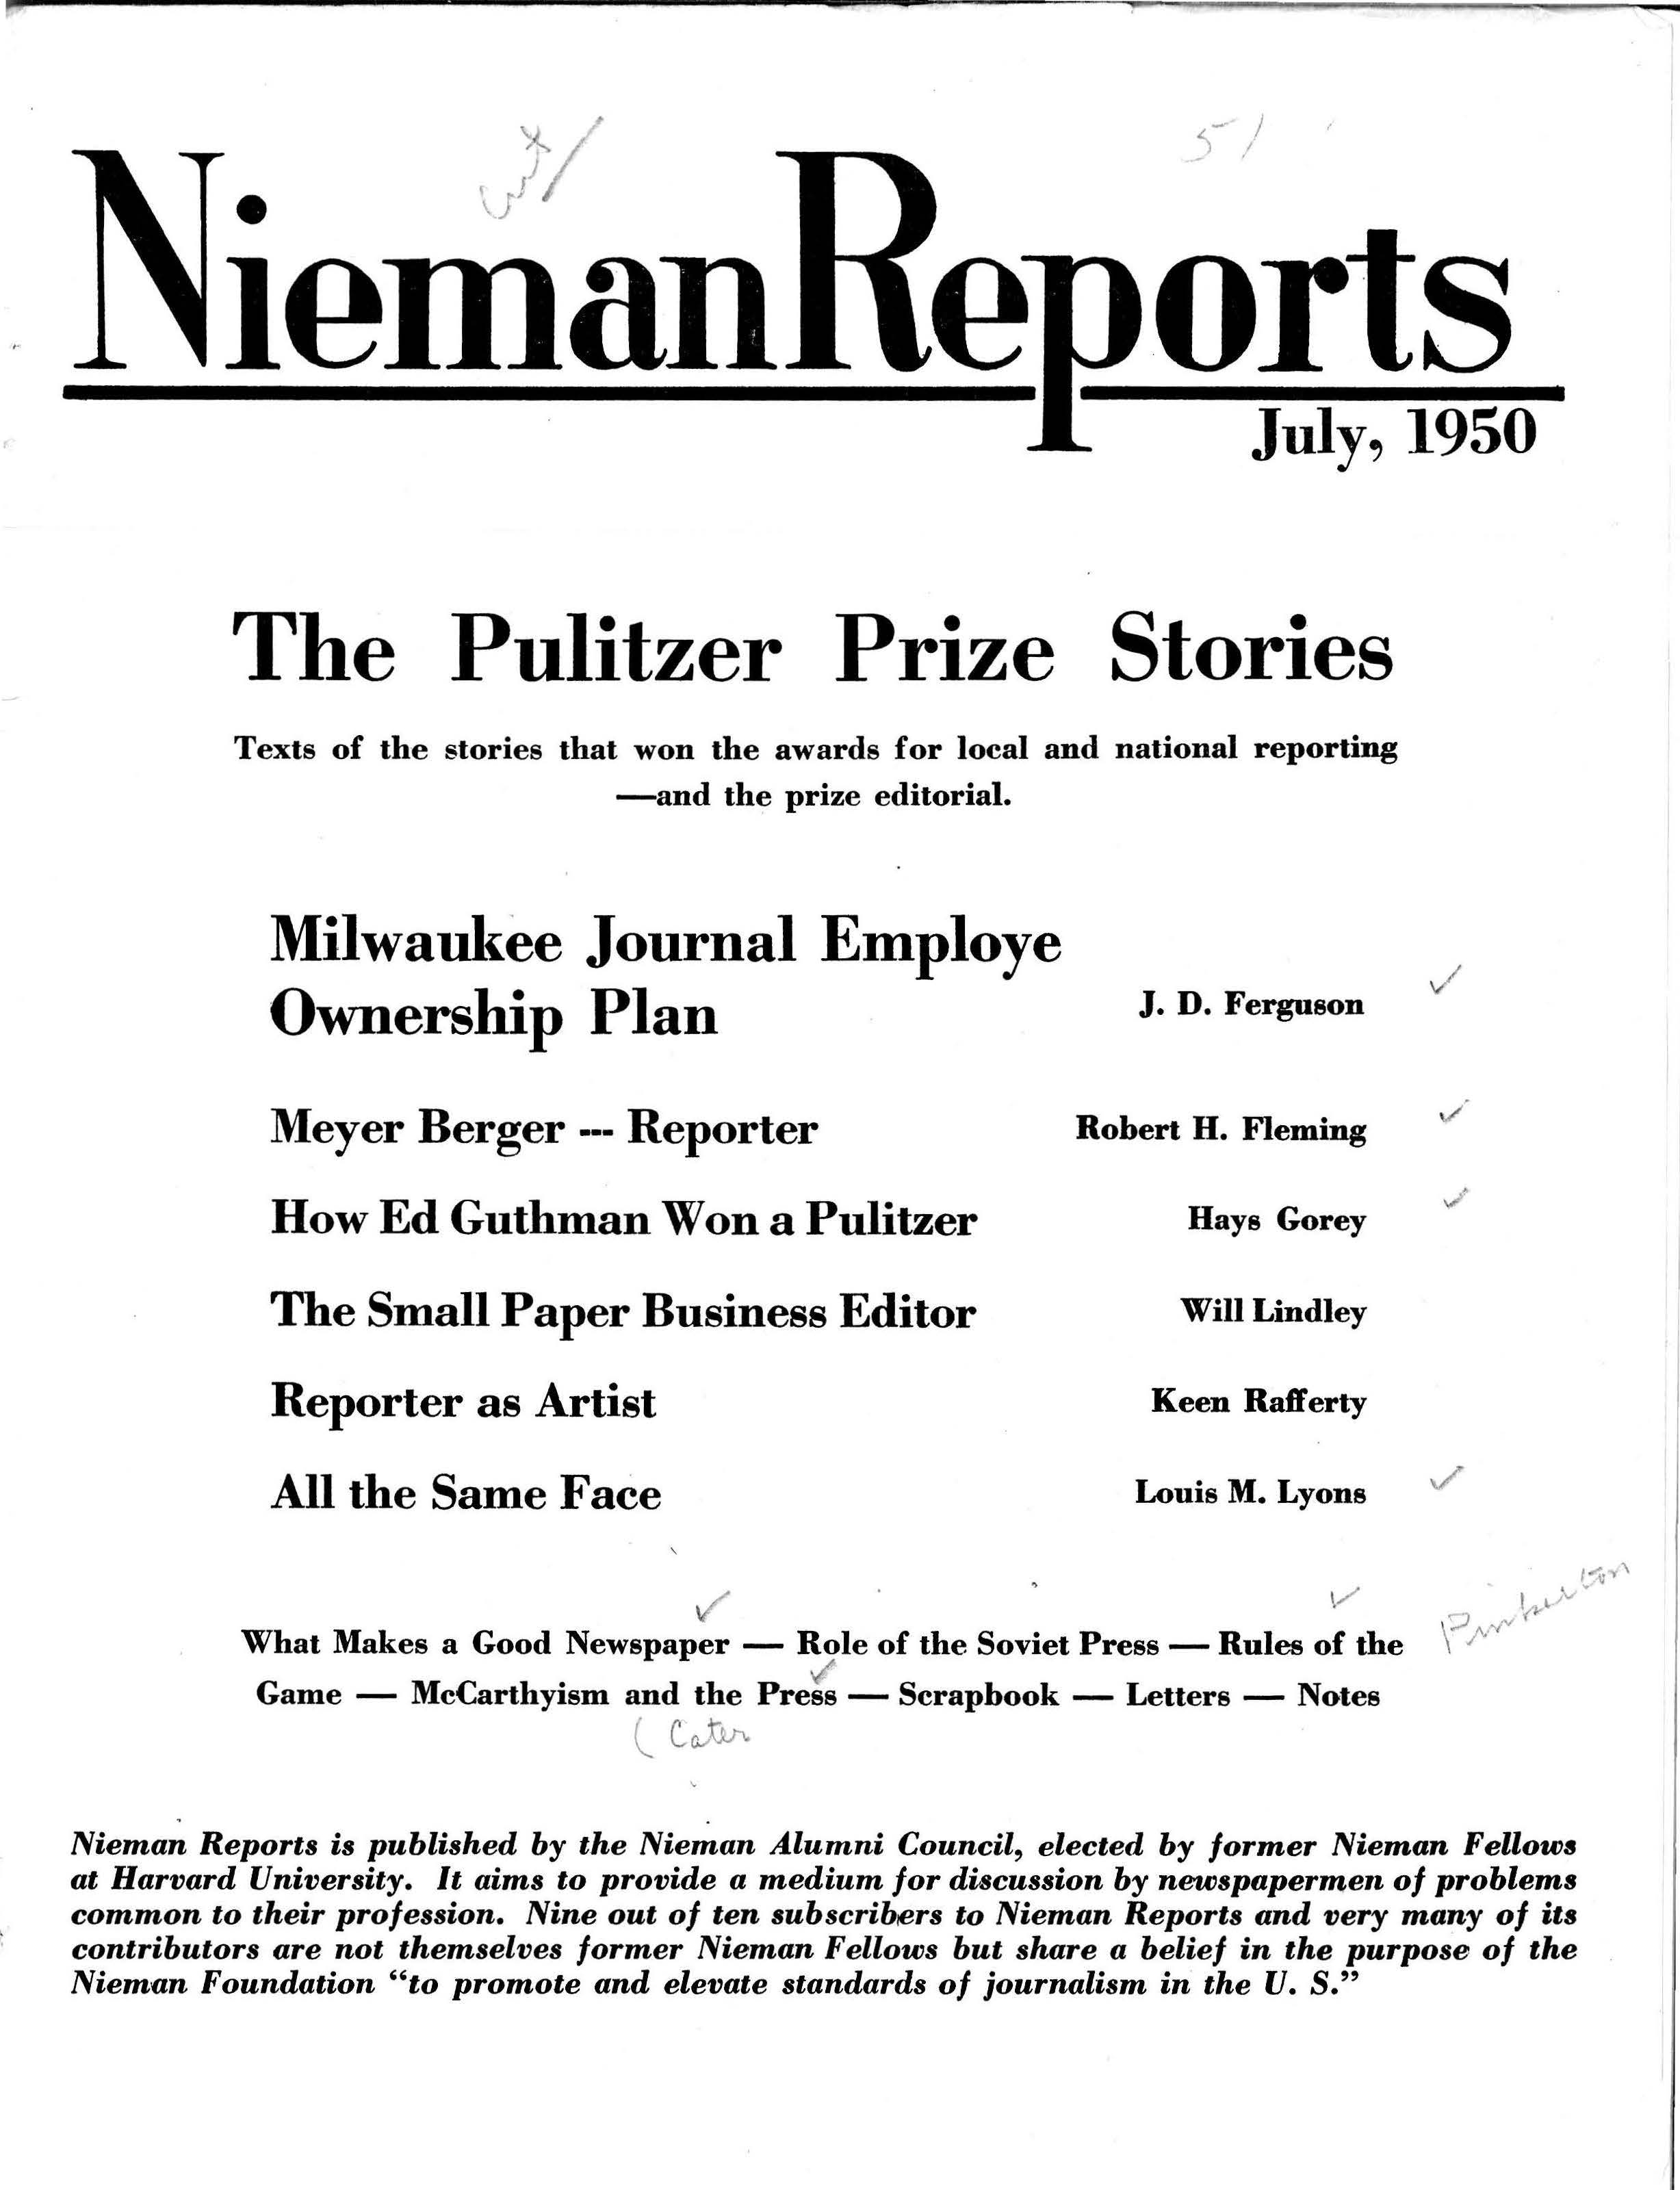 The Pulitzer Prize Stories